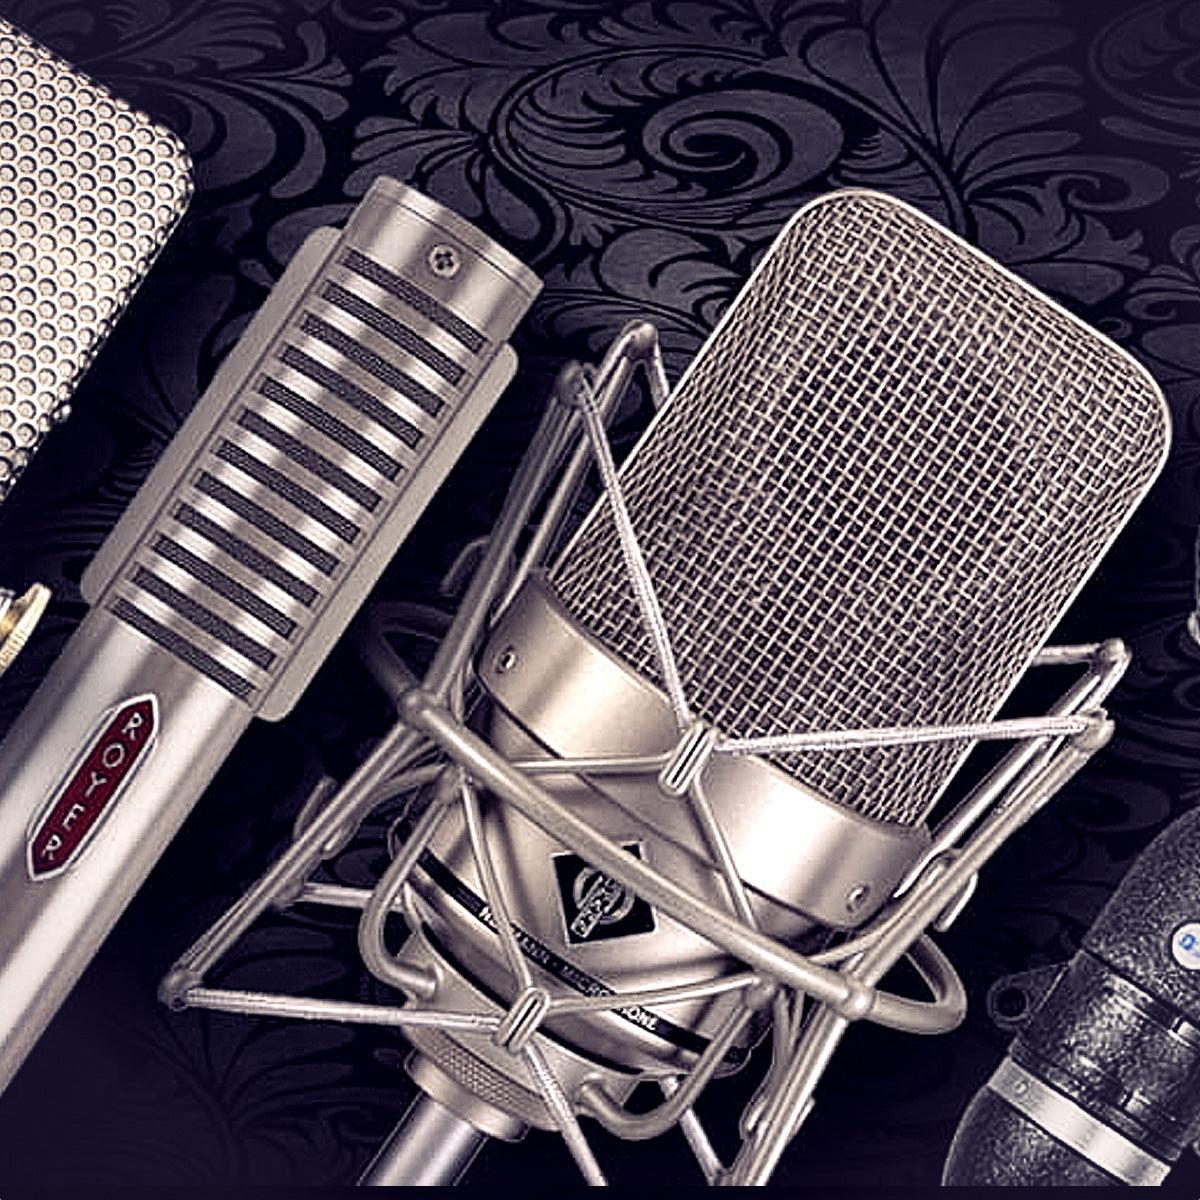 KMR Audio Hire - Microphone Hire